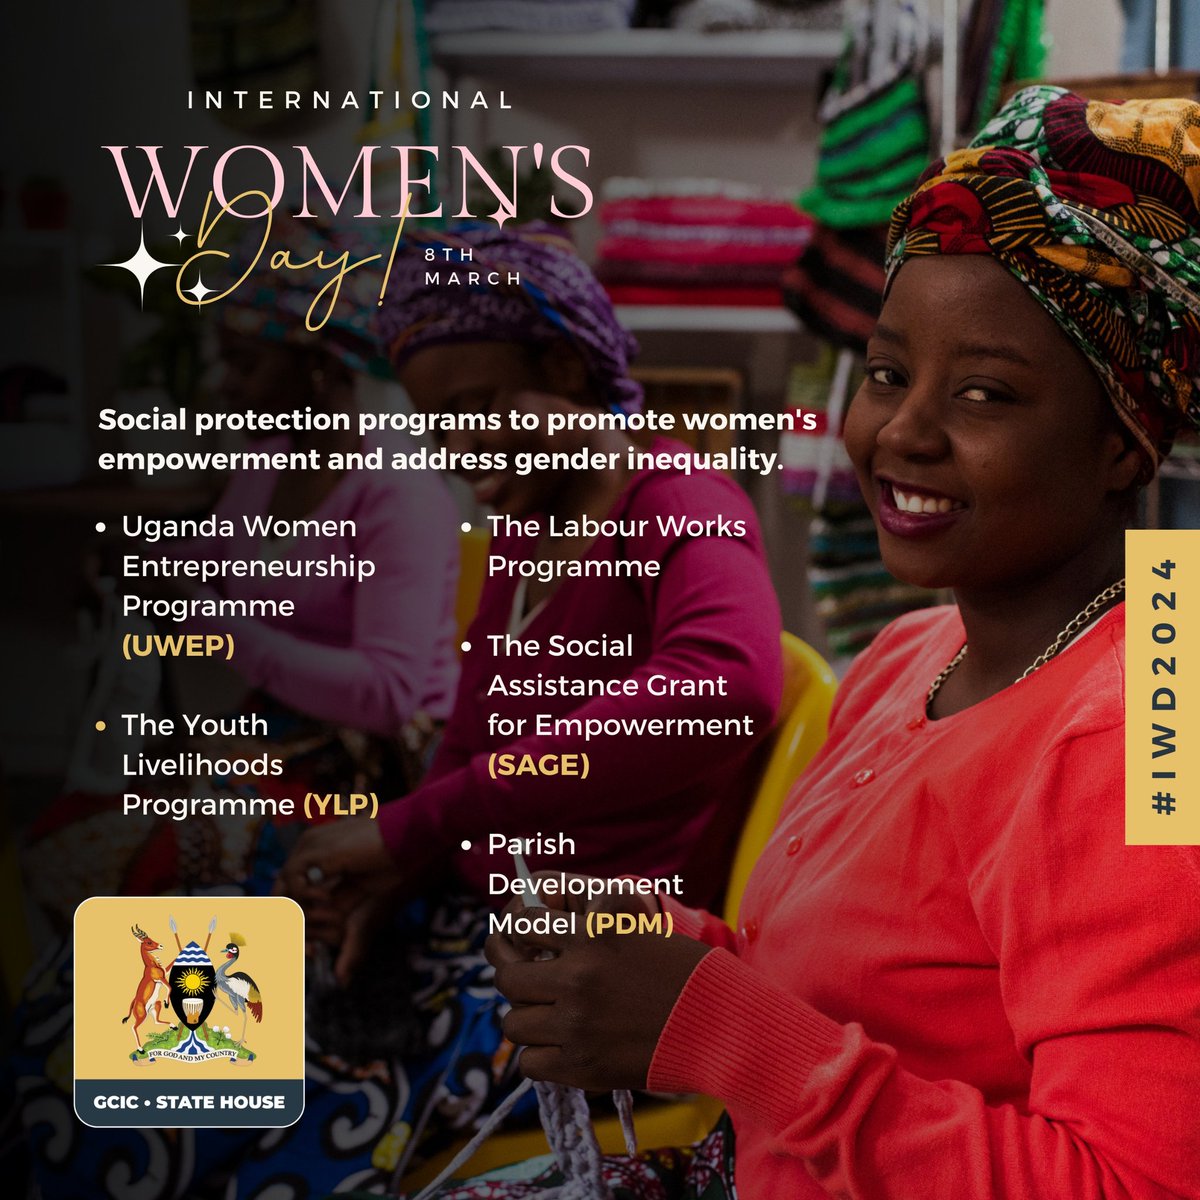 Happy women's day! Here are some of the social protection programs set up by @GovUganda to promote women's empowerment & address gender inequality. 
#OpenGovtUg